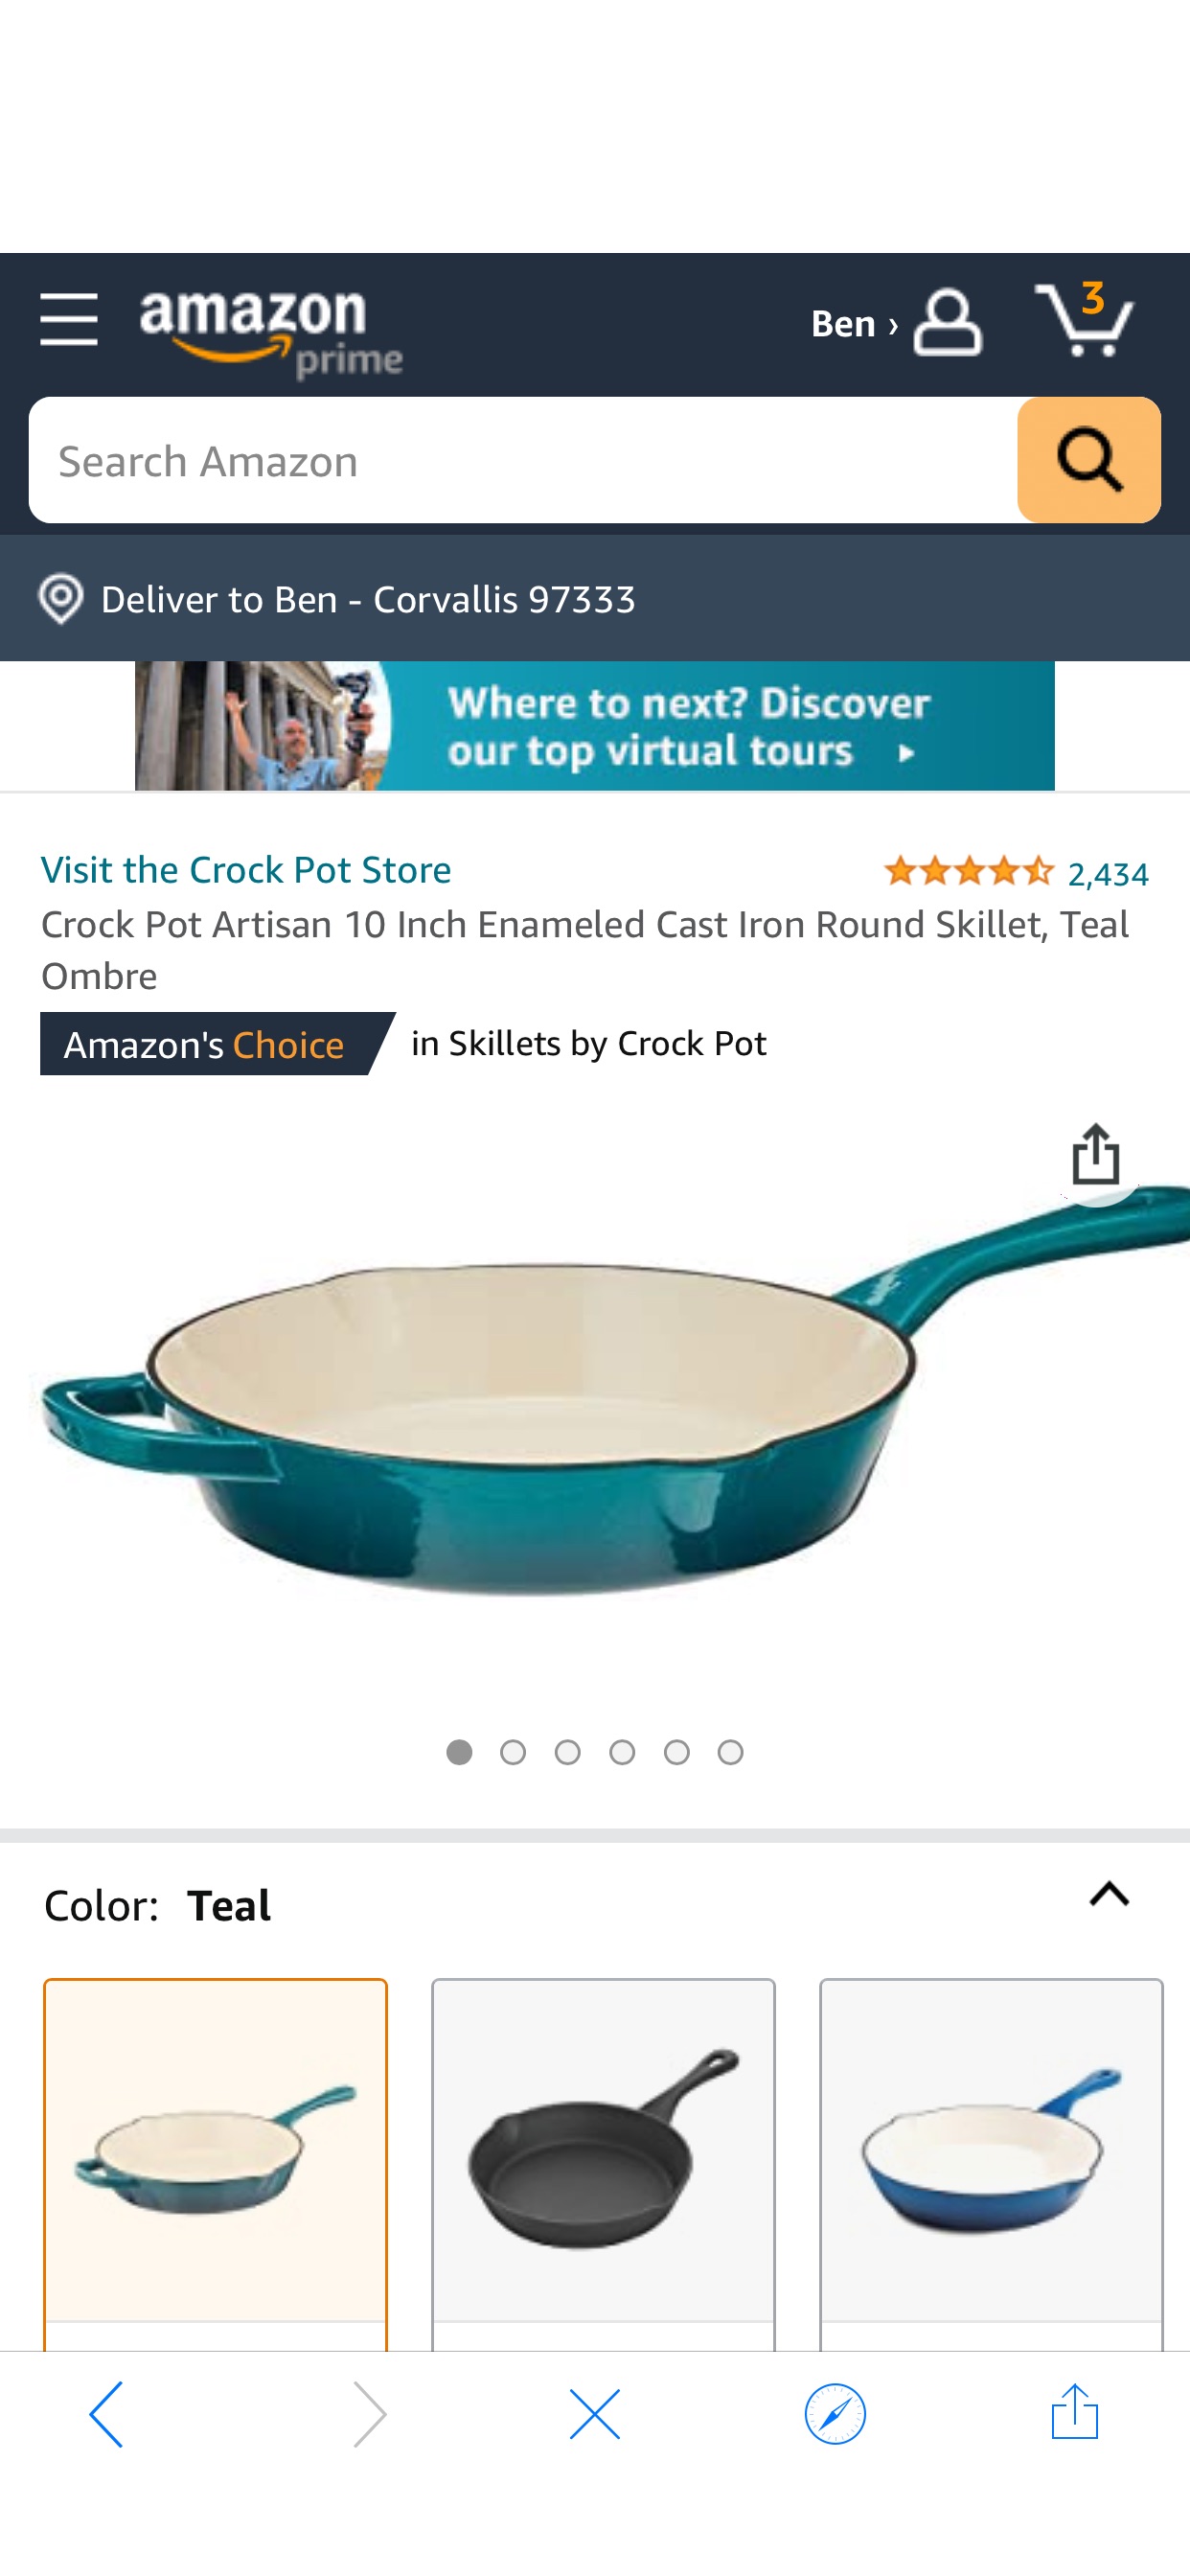 Amazon.com: Crock Pot Artisan 10 Inch Enameled Cast Iron Round Skillet, Teal Ombre: Home & Kitchen